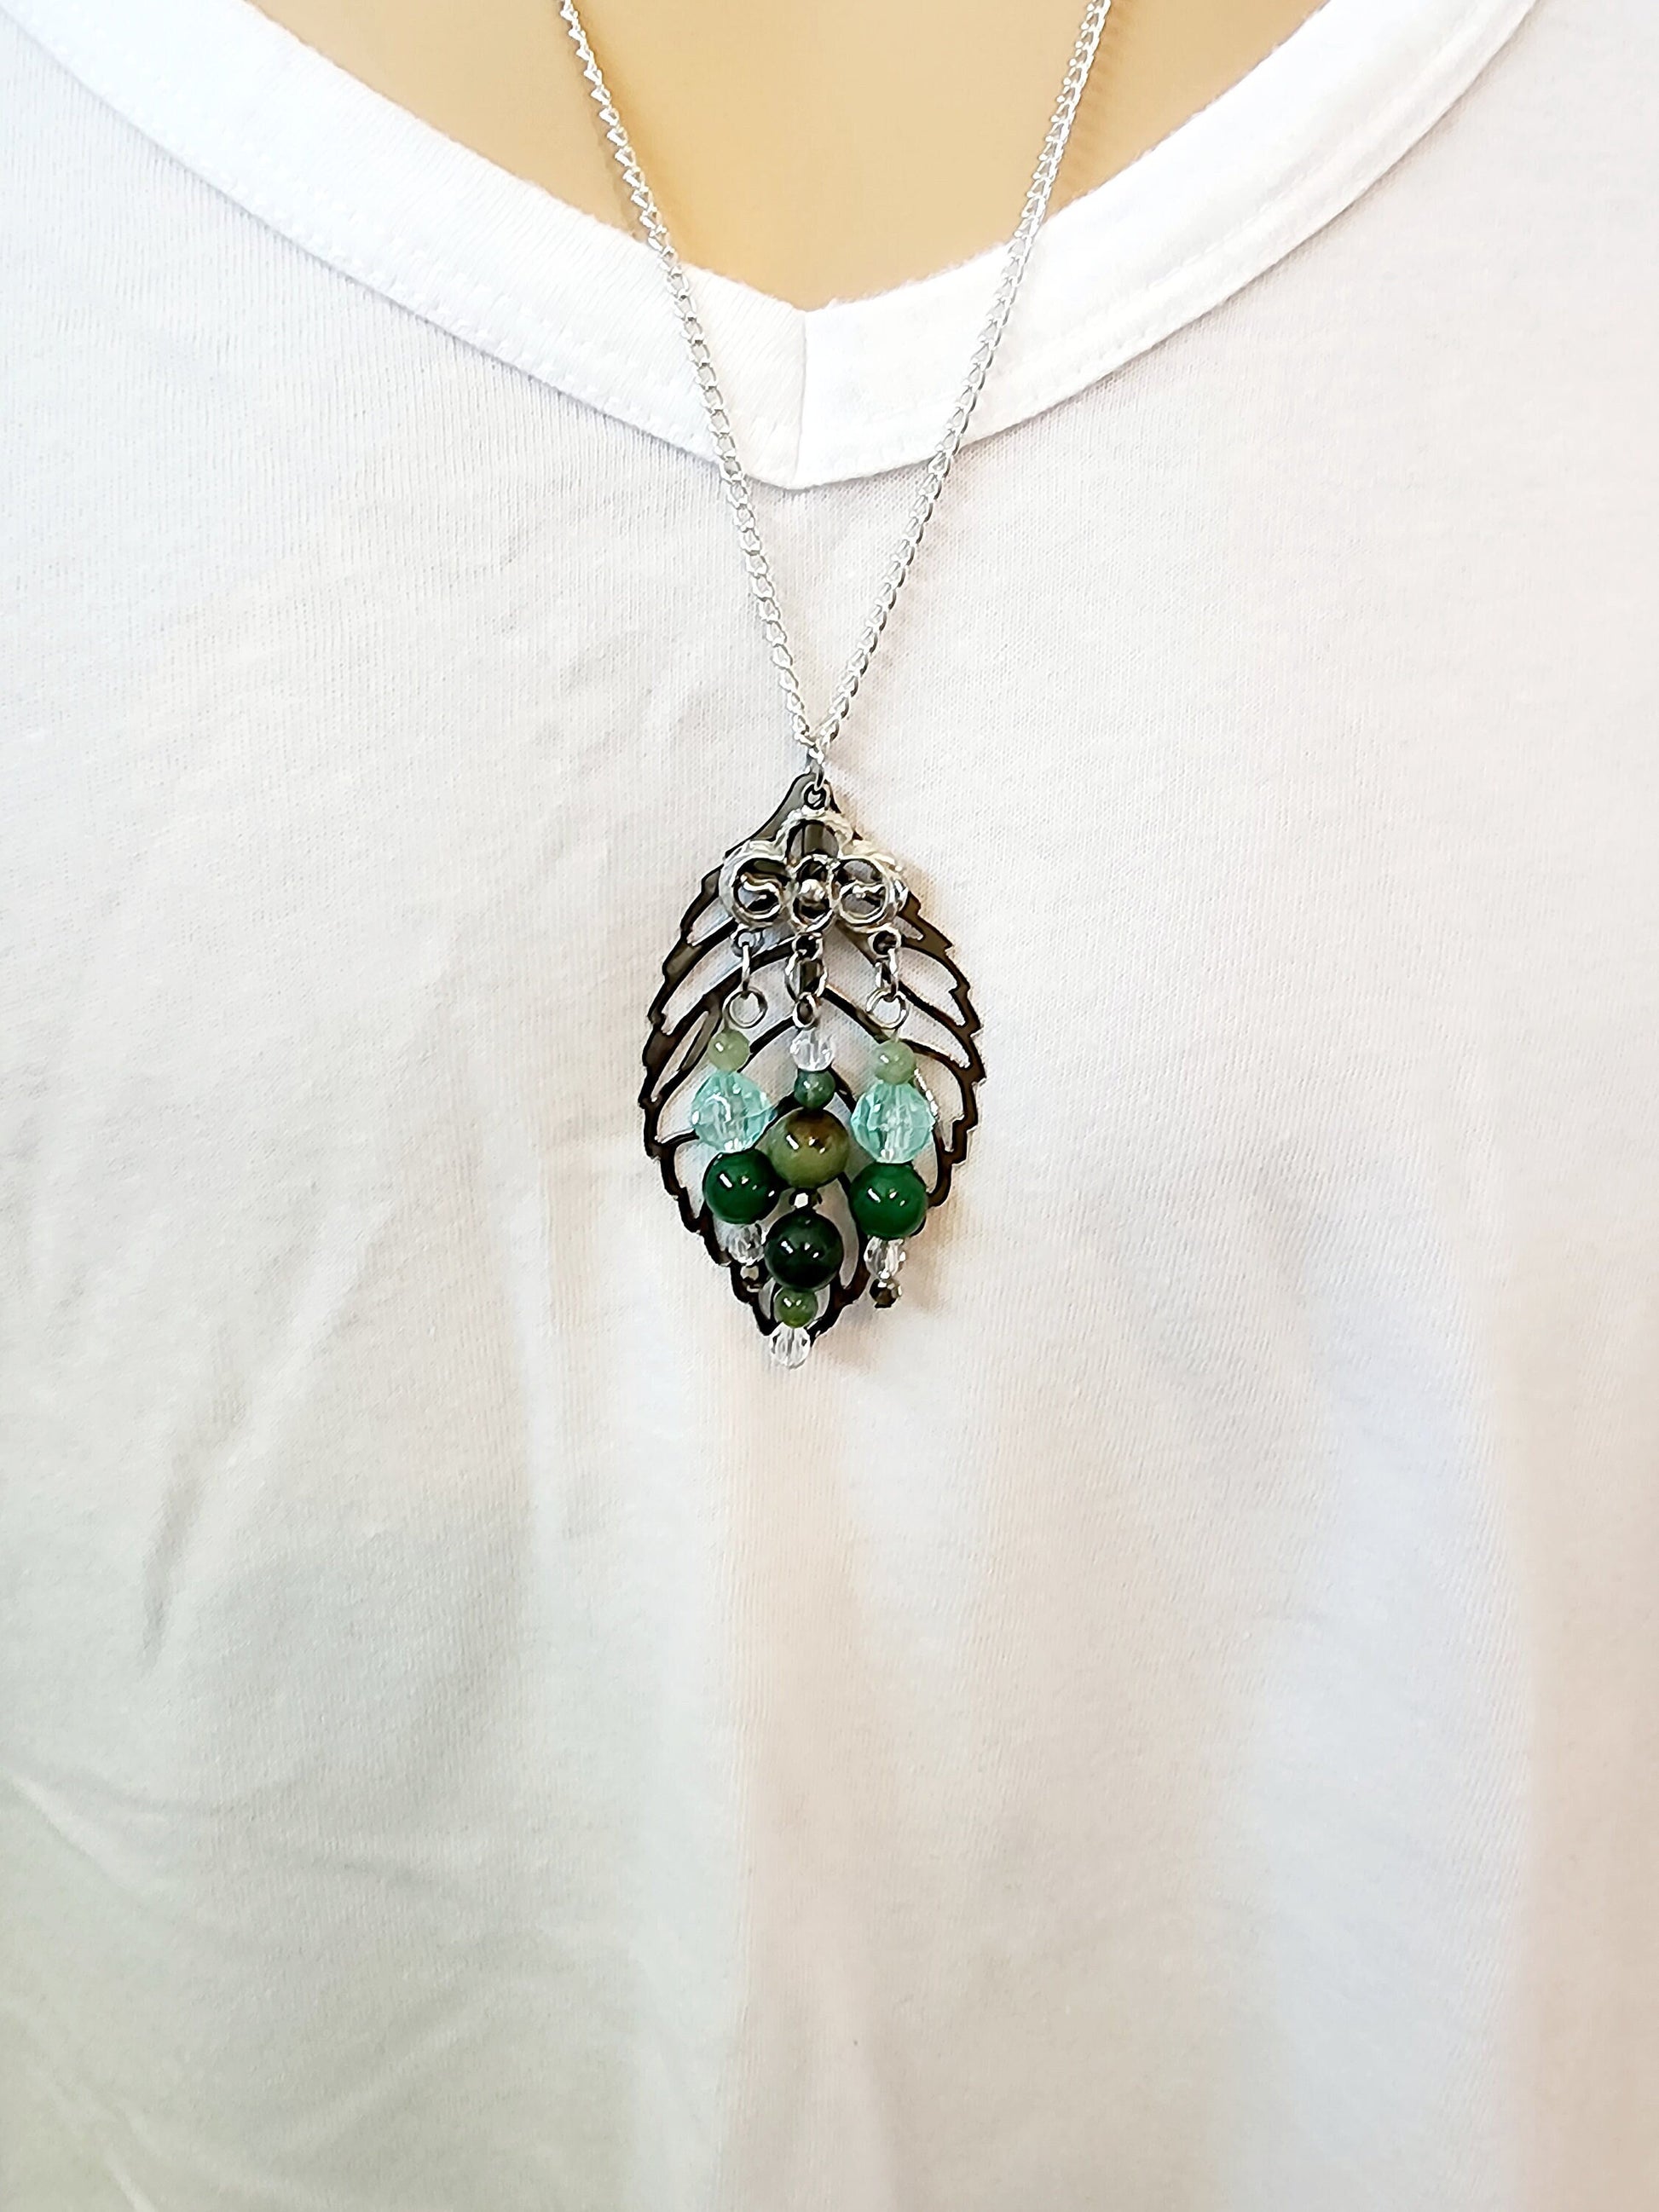 Green Leaf Necklace, Natural Stone Necklace